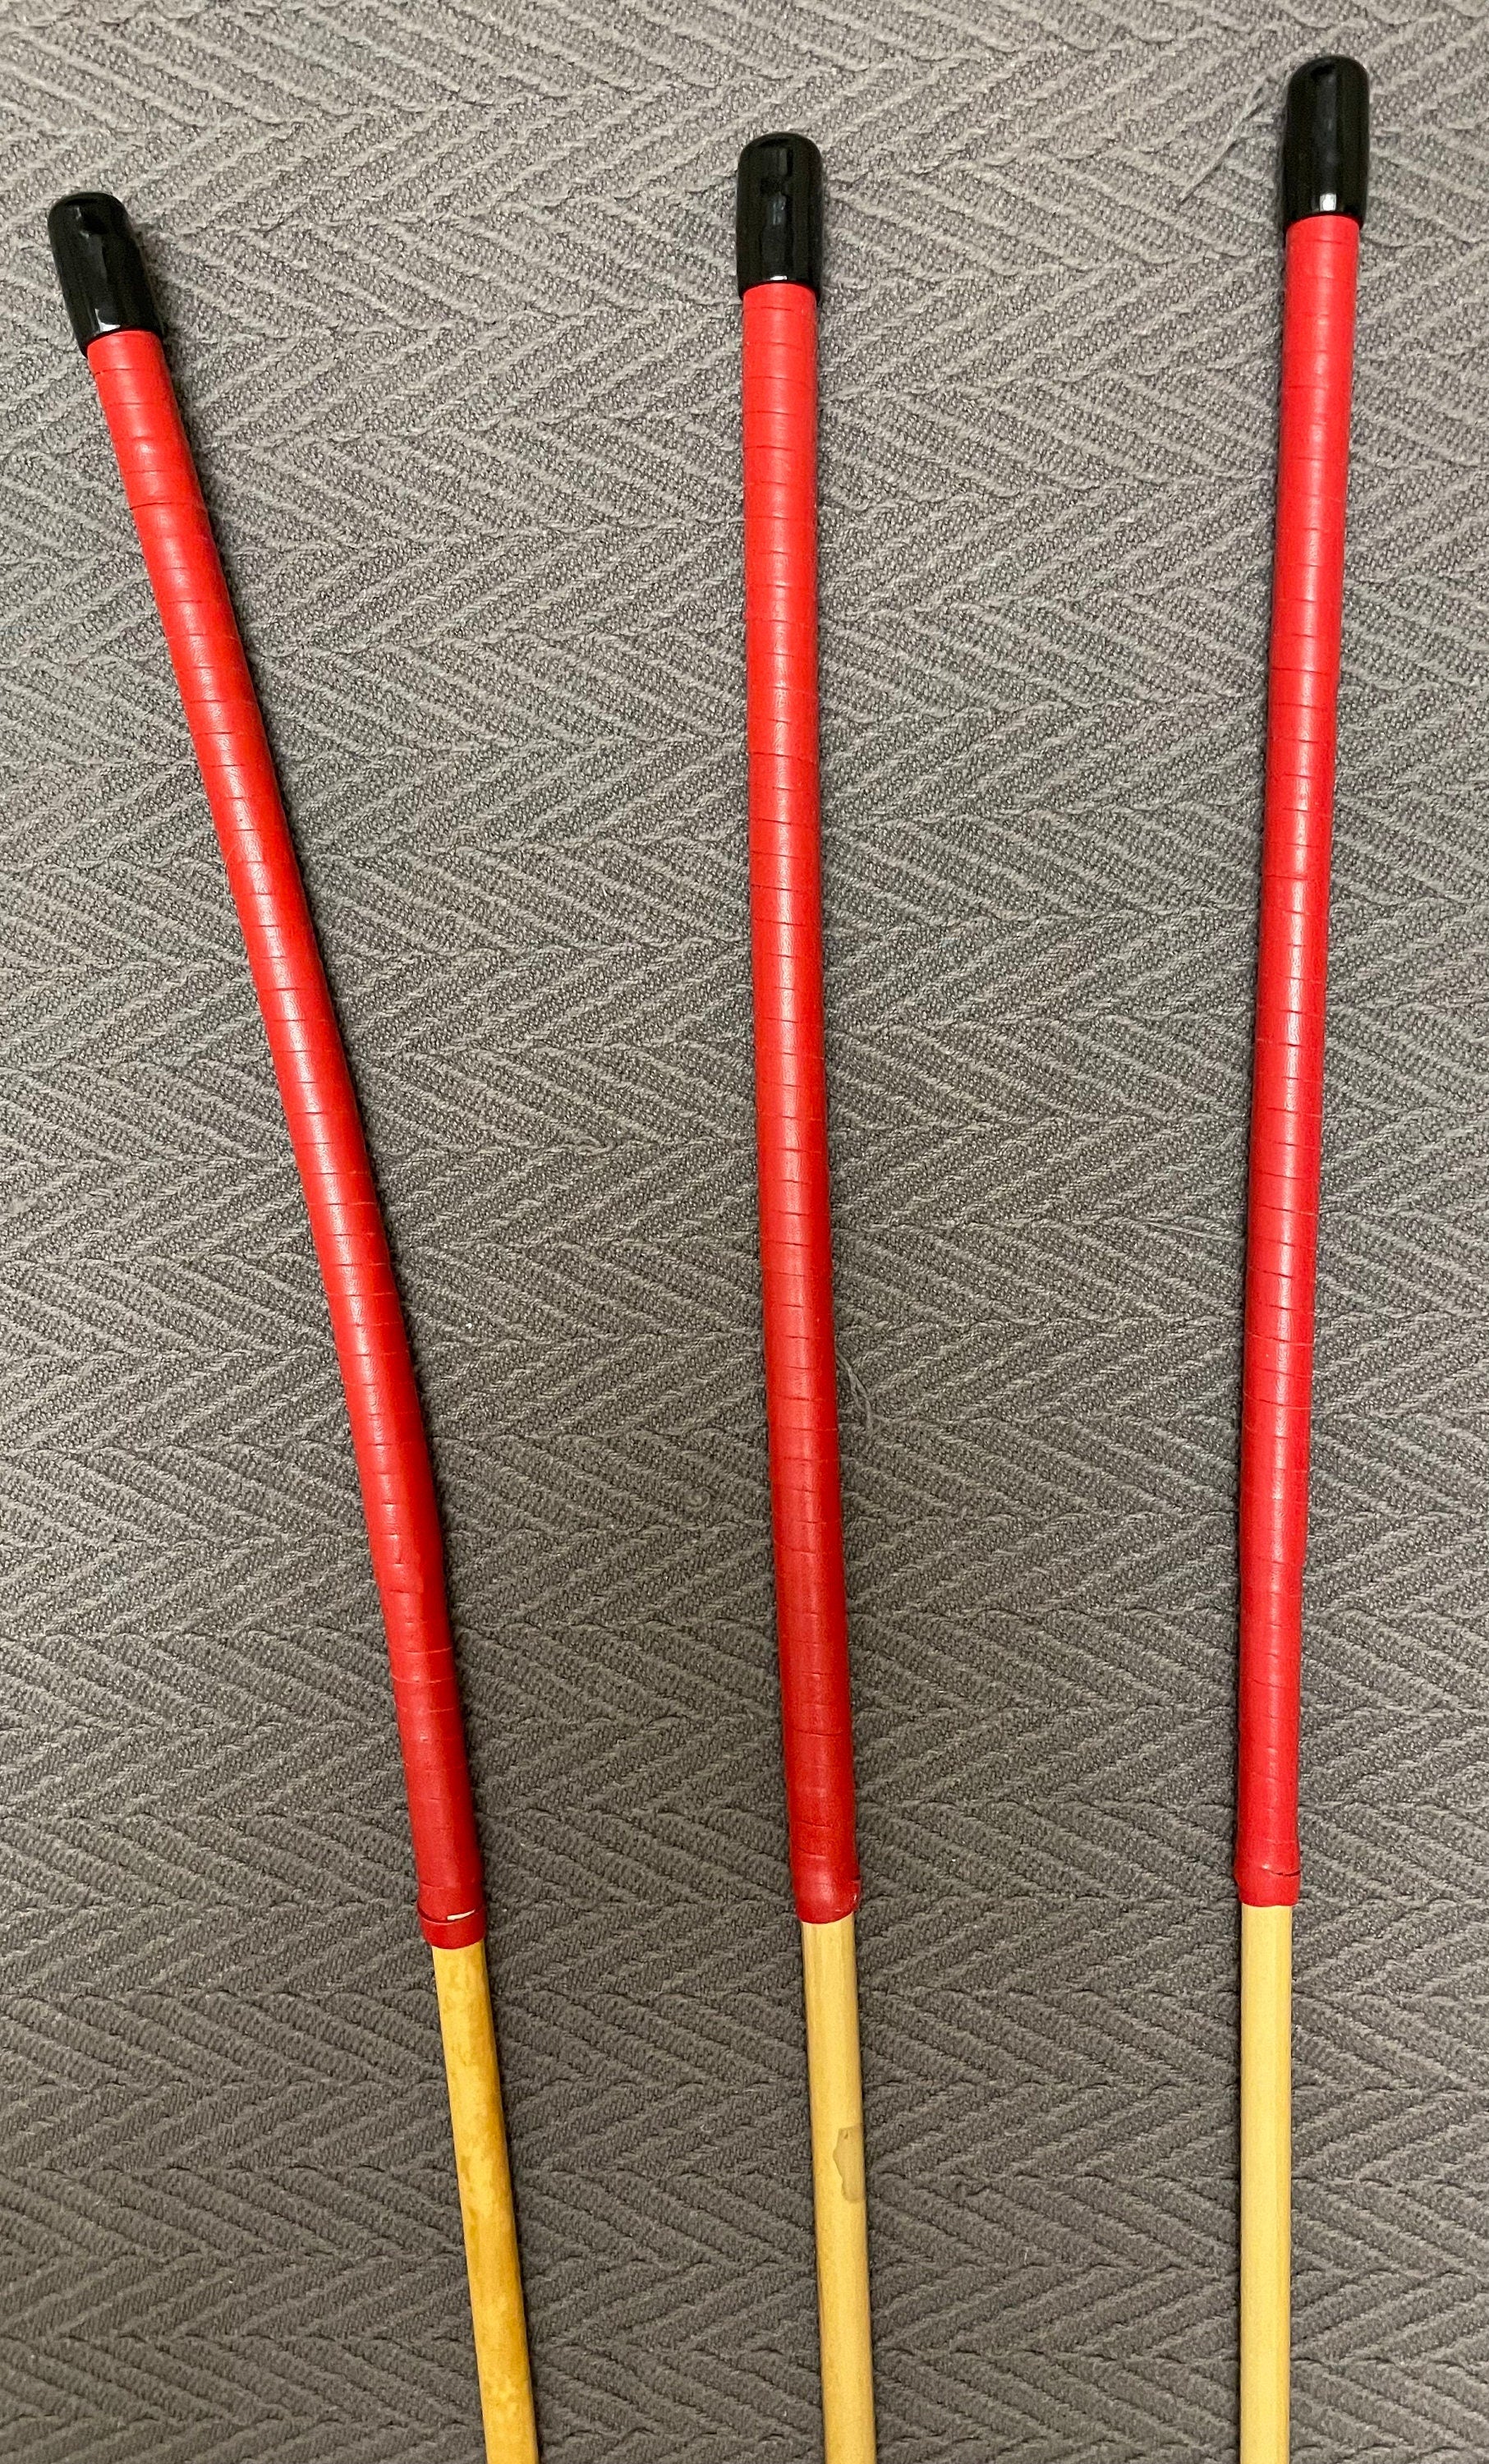 Set of 3 Knotless Dragon Canes / Ultimate Rattan Canes / No Knot Canes with Red Kangaroo Leather Handles